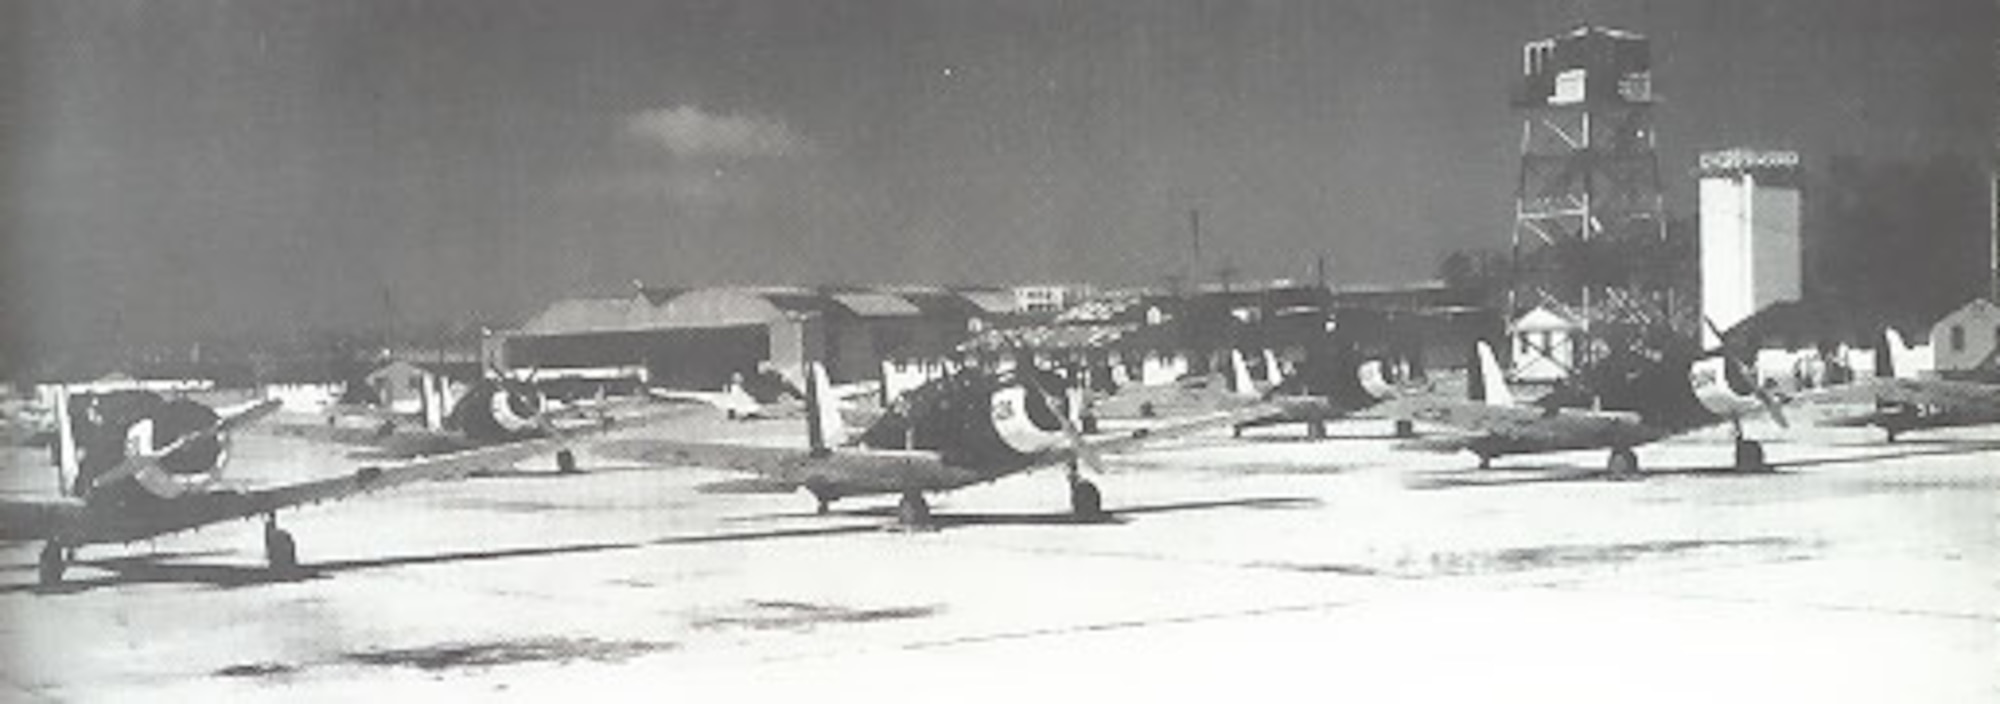 Vultee BT-13 “Valiant” aircraft are lined up at Shaw Army Air Field, S.C., 1942. The BT-13 was utilized by the Army Air Corps to train new pilots on the basics of aircraft maneuverability in a basic flying course. (Courtesy photo) 